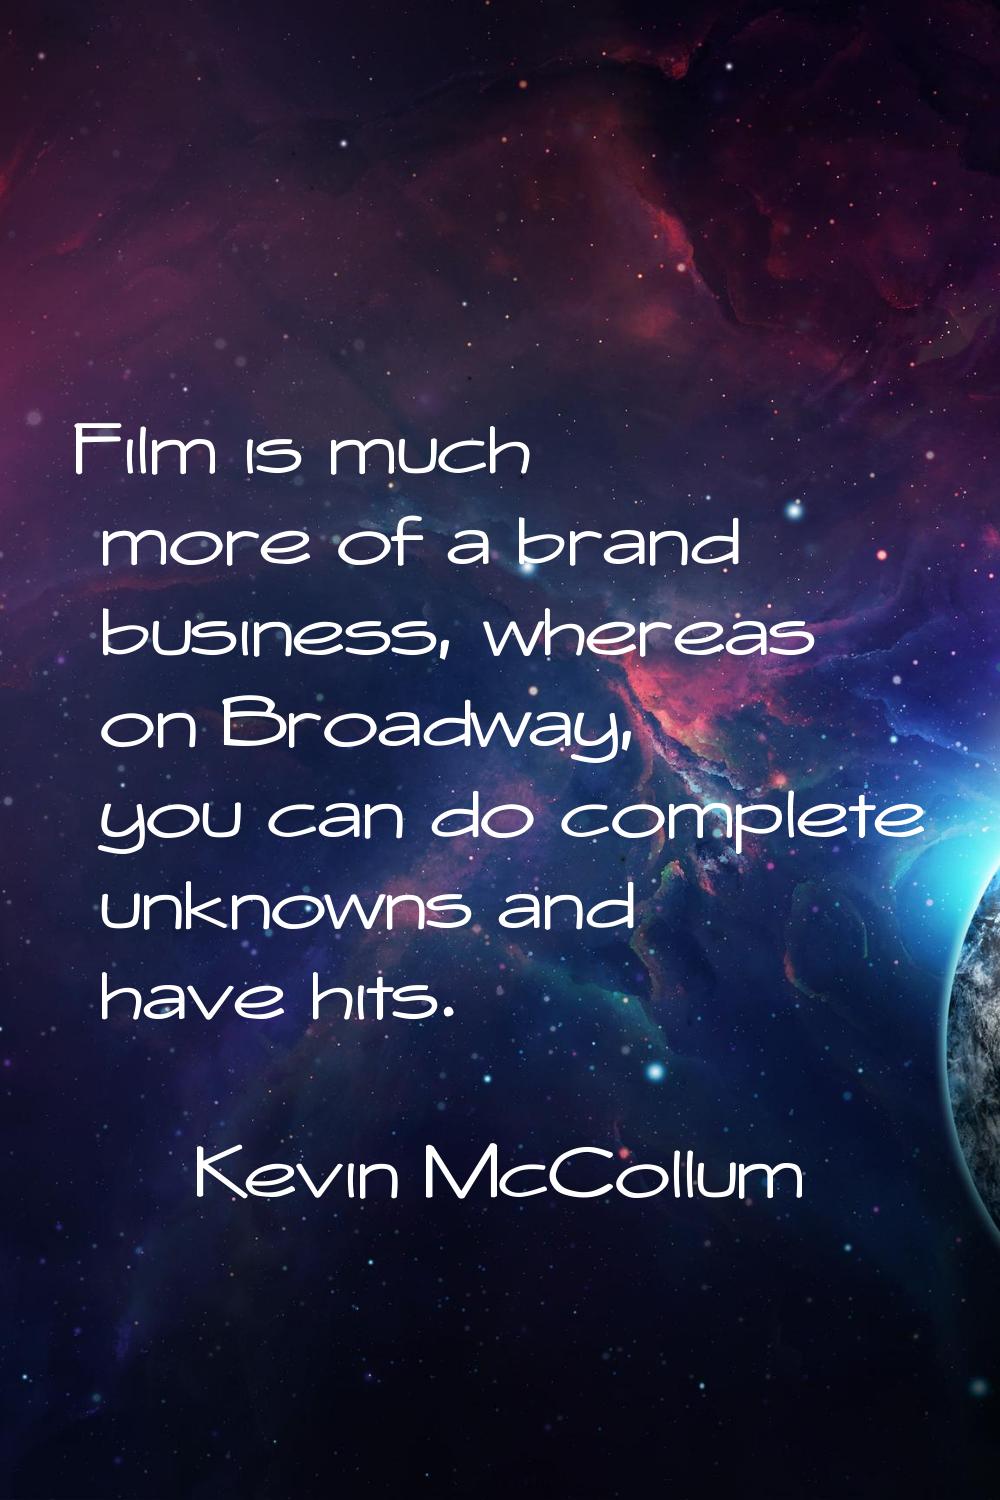 Film is much more of a brand business, whereas on Broadway, you can do complete unknowns and have h